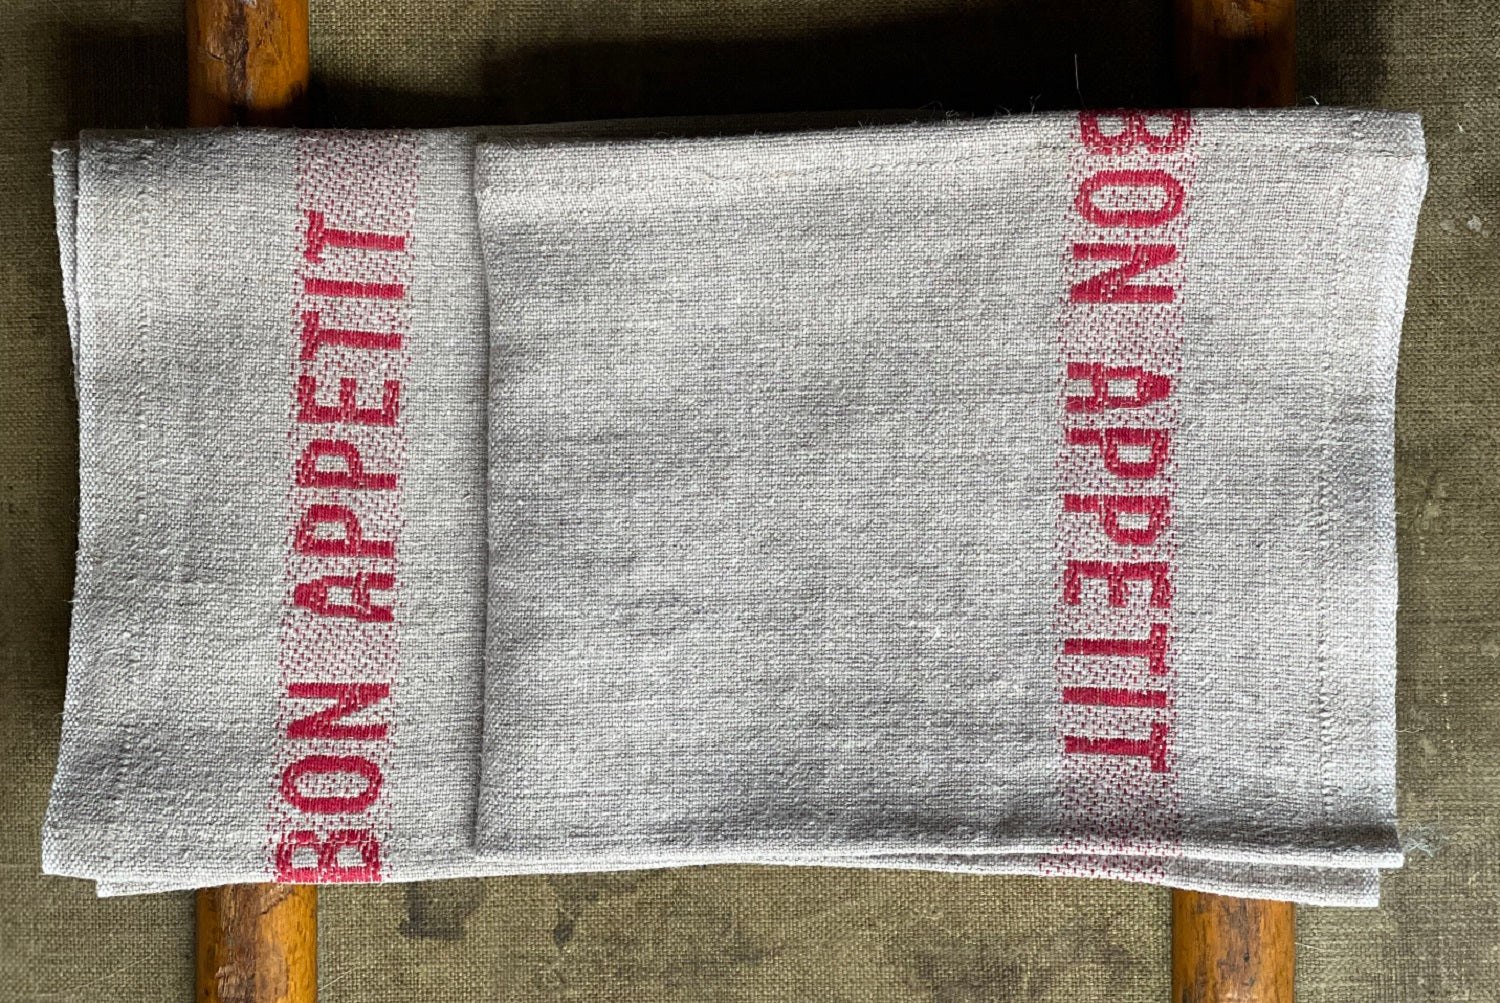 Charvet Editions "Bon Appetit" (Red), Natural woven linen napkin. Made in France.